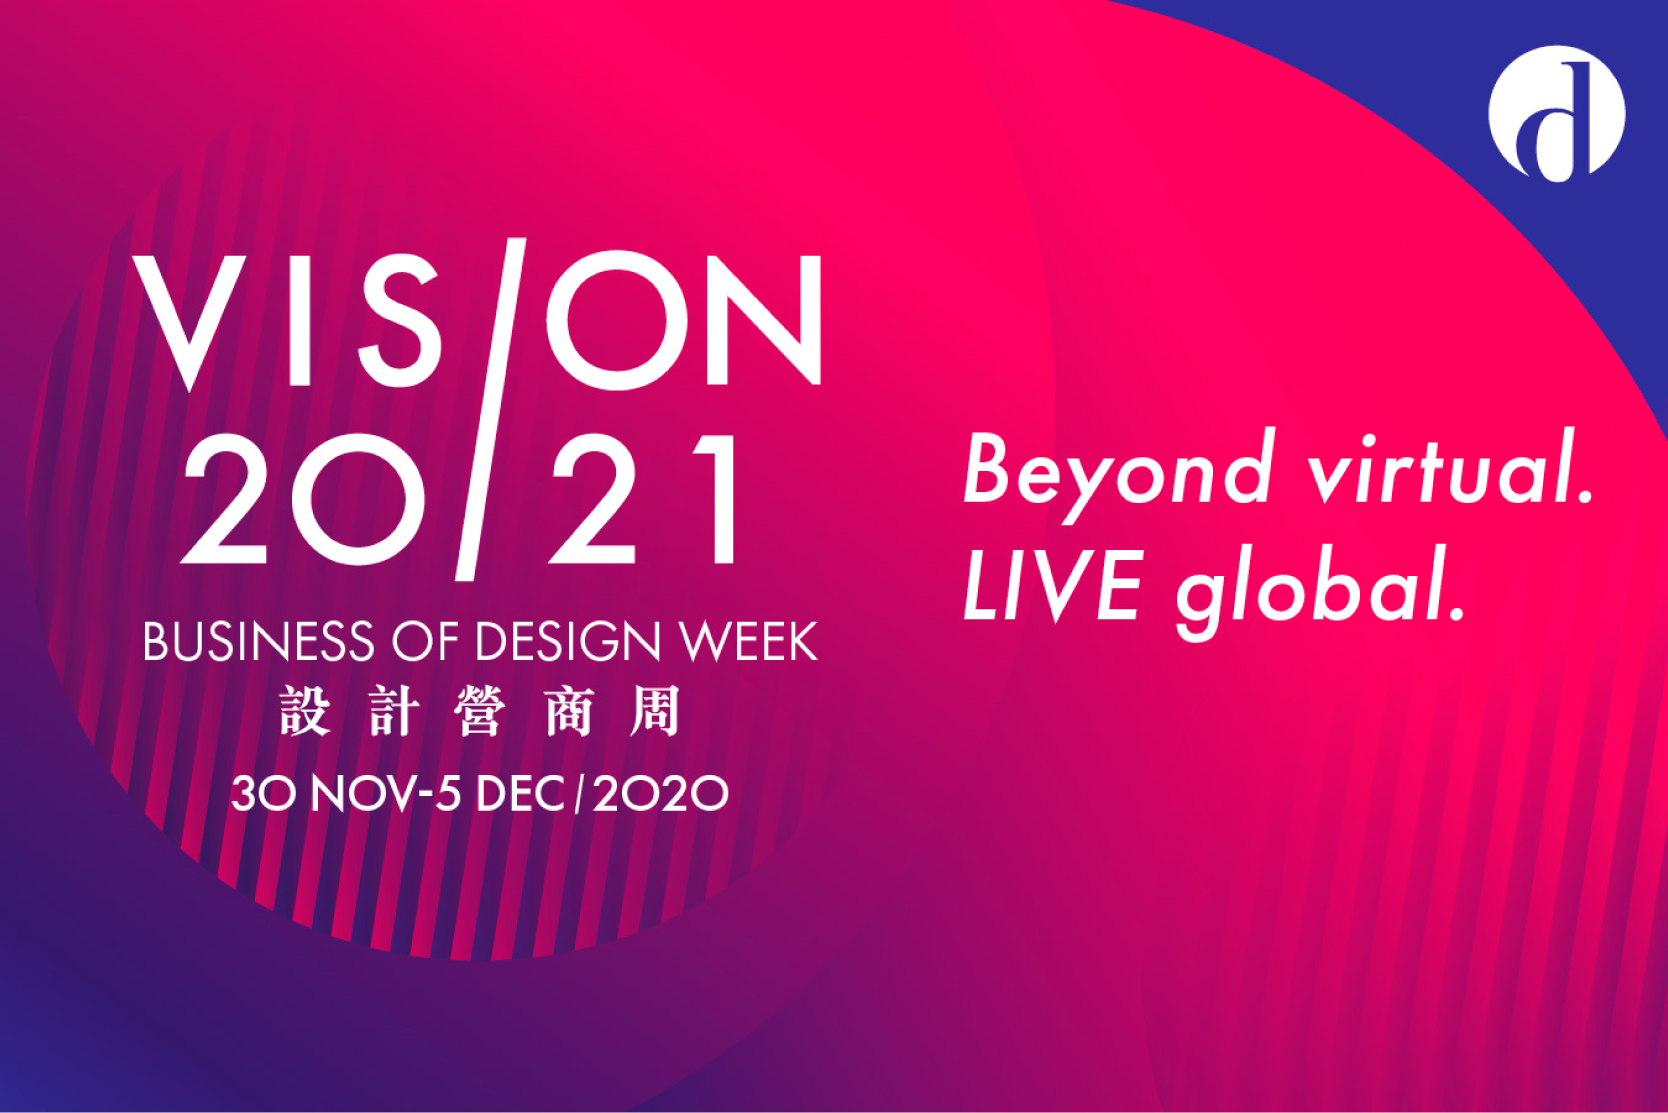 Join 100+ Global Experts at Business of Design Week (BODW) 2020